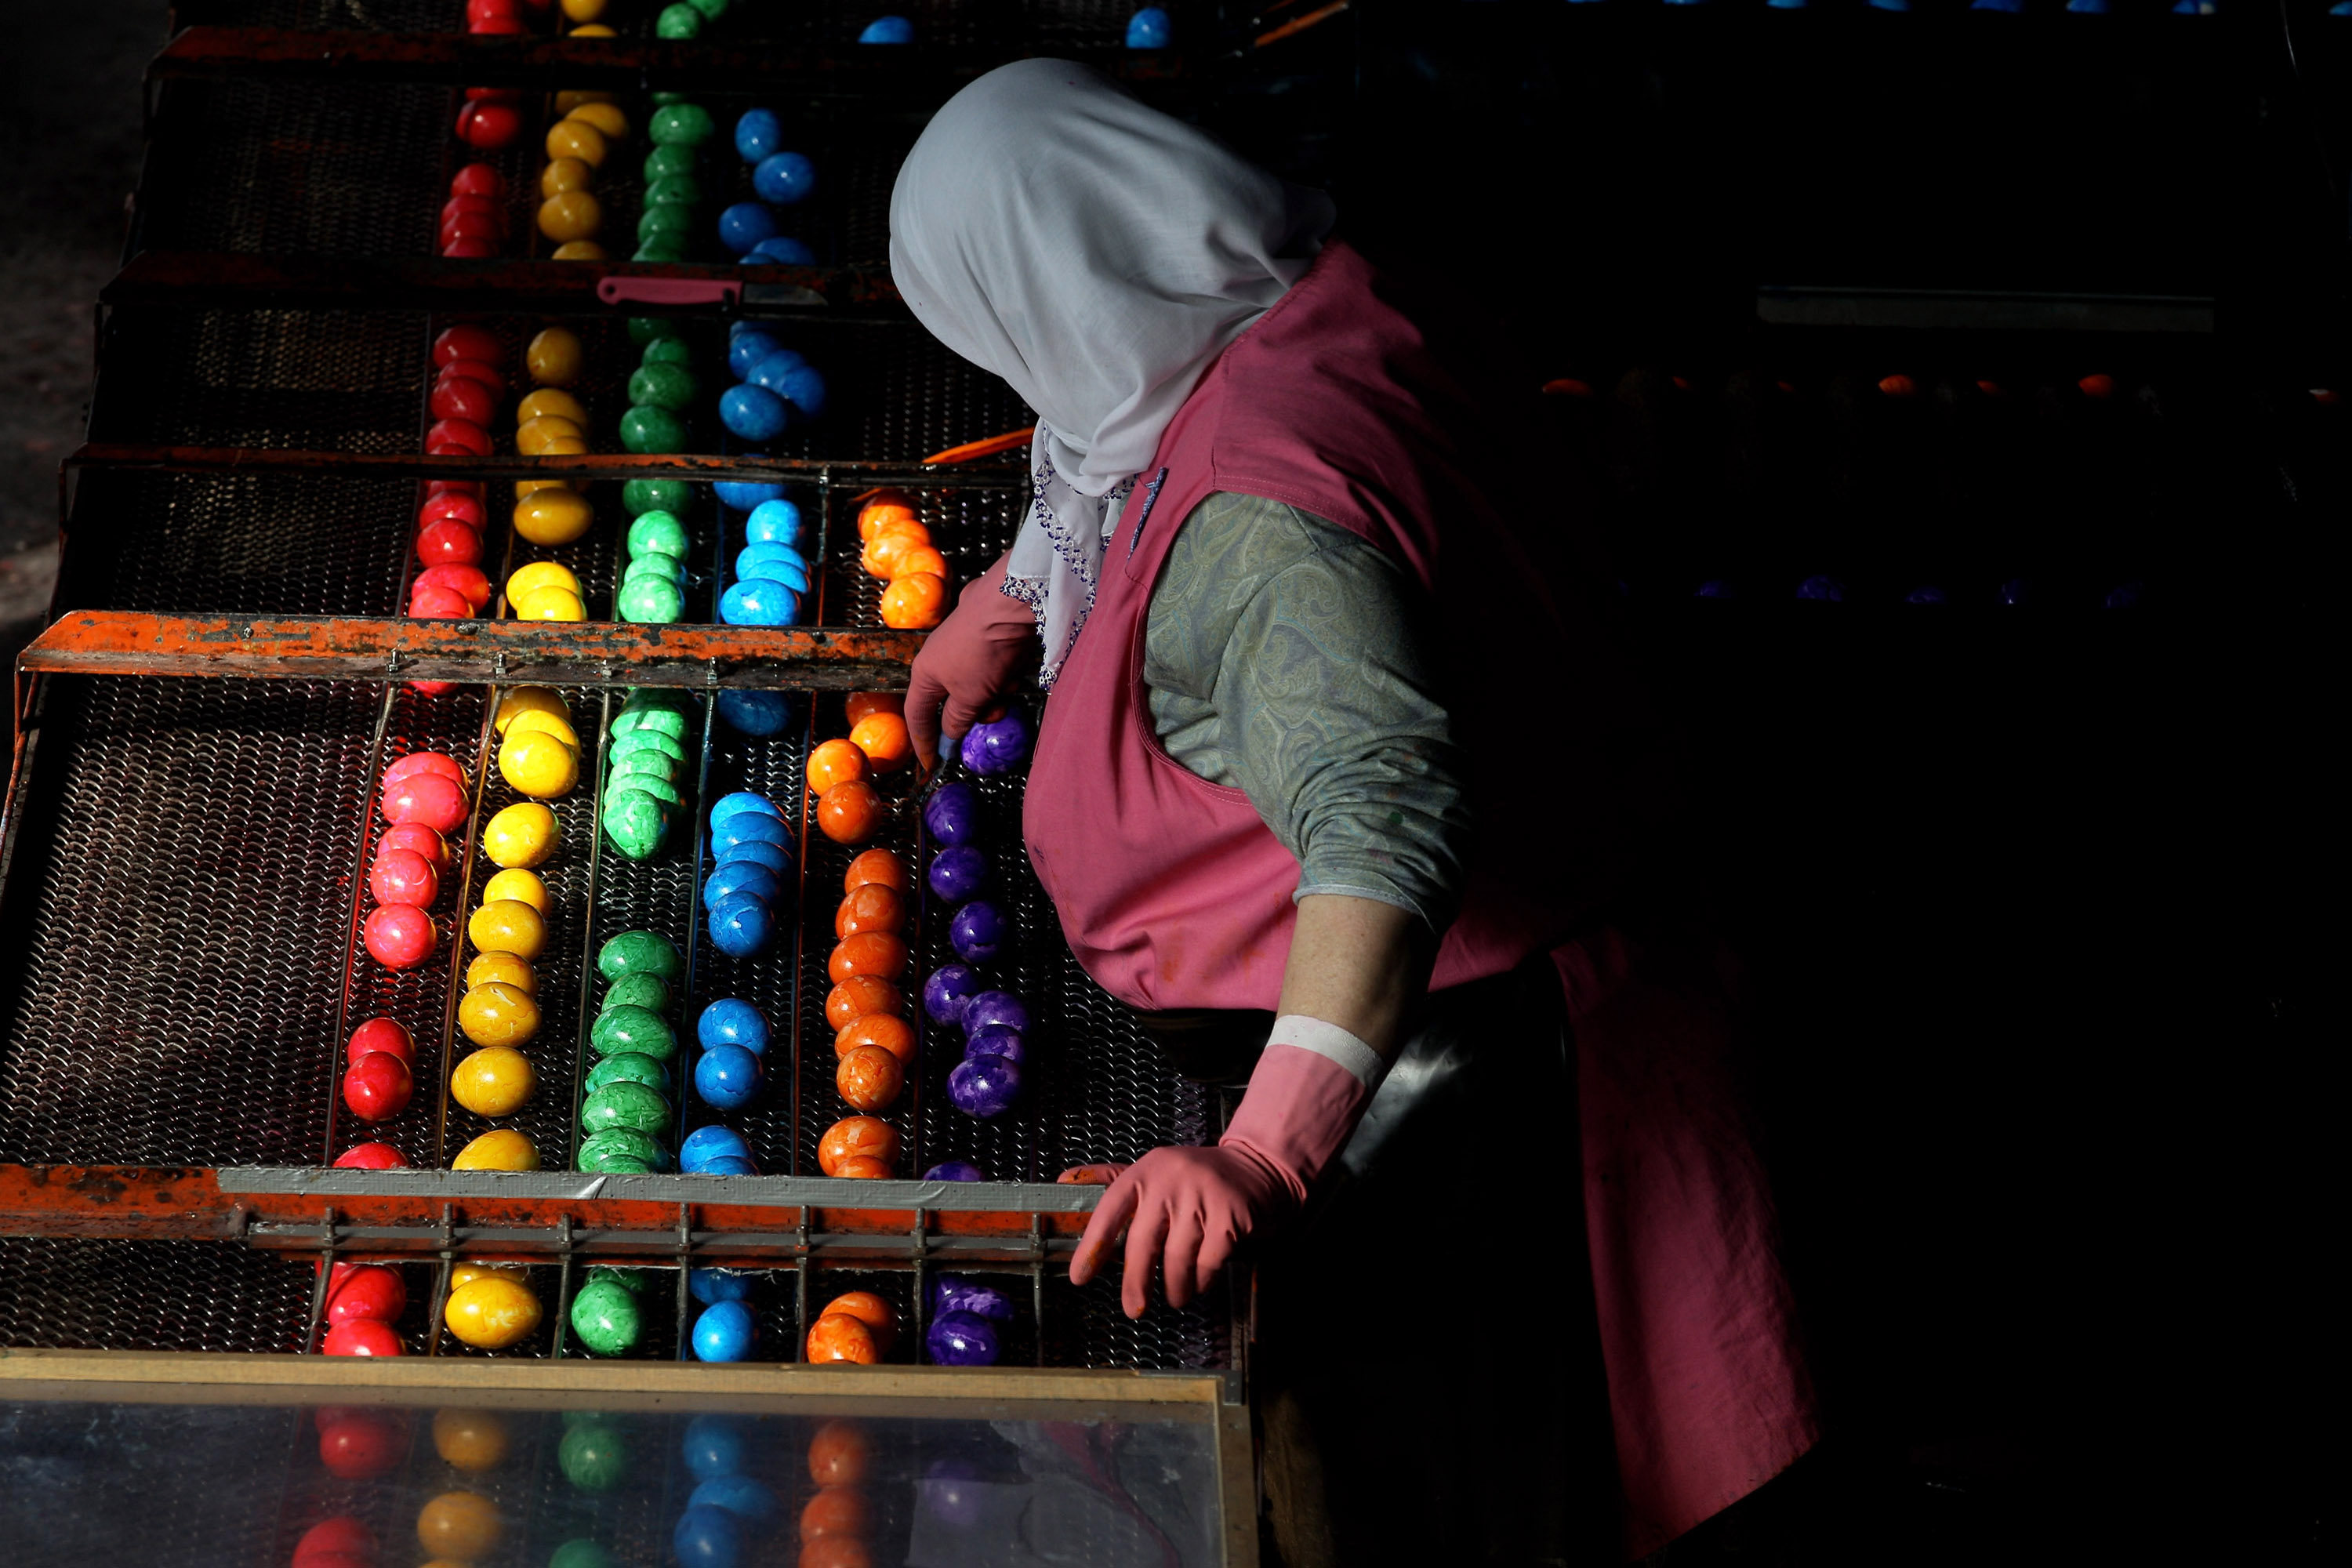 A worker oversees cooked, coloured eggs between production stages at the Beham coloured eggs company on March 30, 2010 in Thannhausen, Germany. Beham is Bavaria�s biggest coloured eggs producer and has stepped up production to meet high demand ahead of Easter. (Photo by Miguel Villagran/Getty Images)